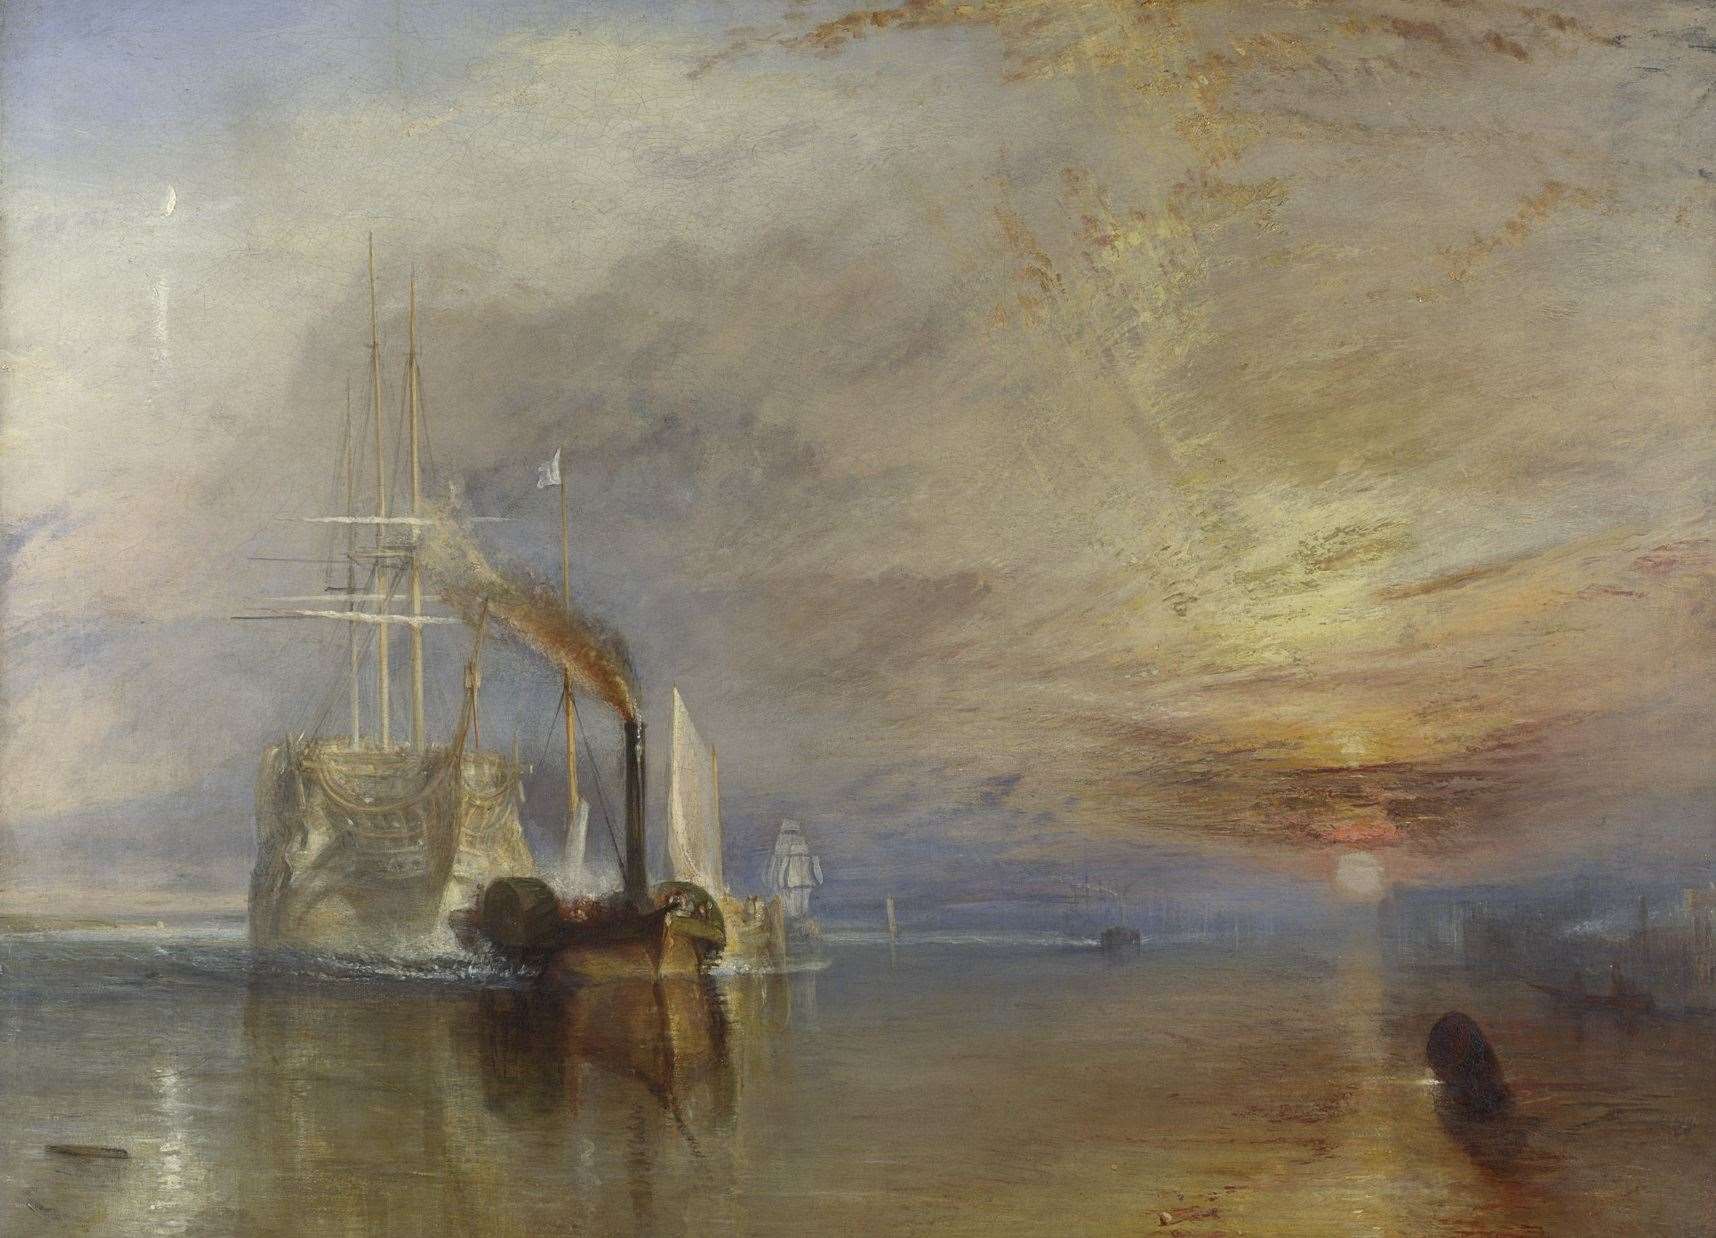 The Fighting Temeraire off Sheppey on its final journey to the scrapyard. It had fought valiantly at the Battle of Trafalgar in 1805. The oil painting is by artist JMW Turner. Picture: National Gallery